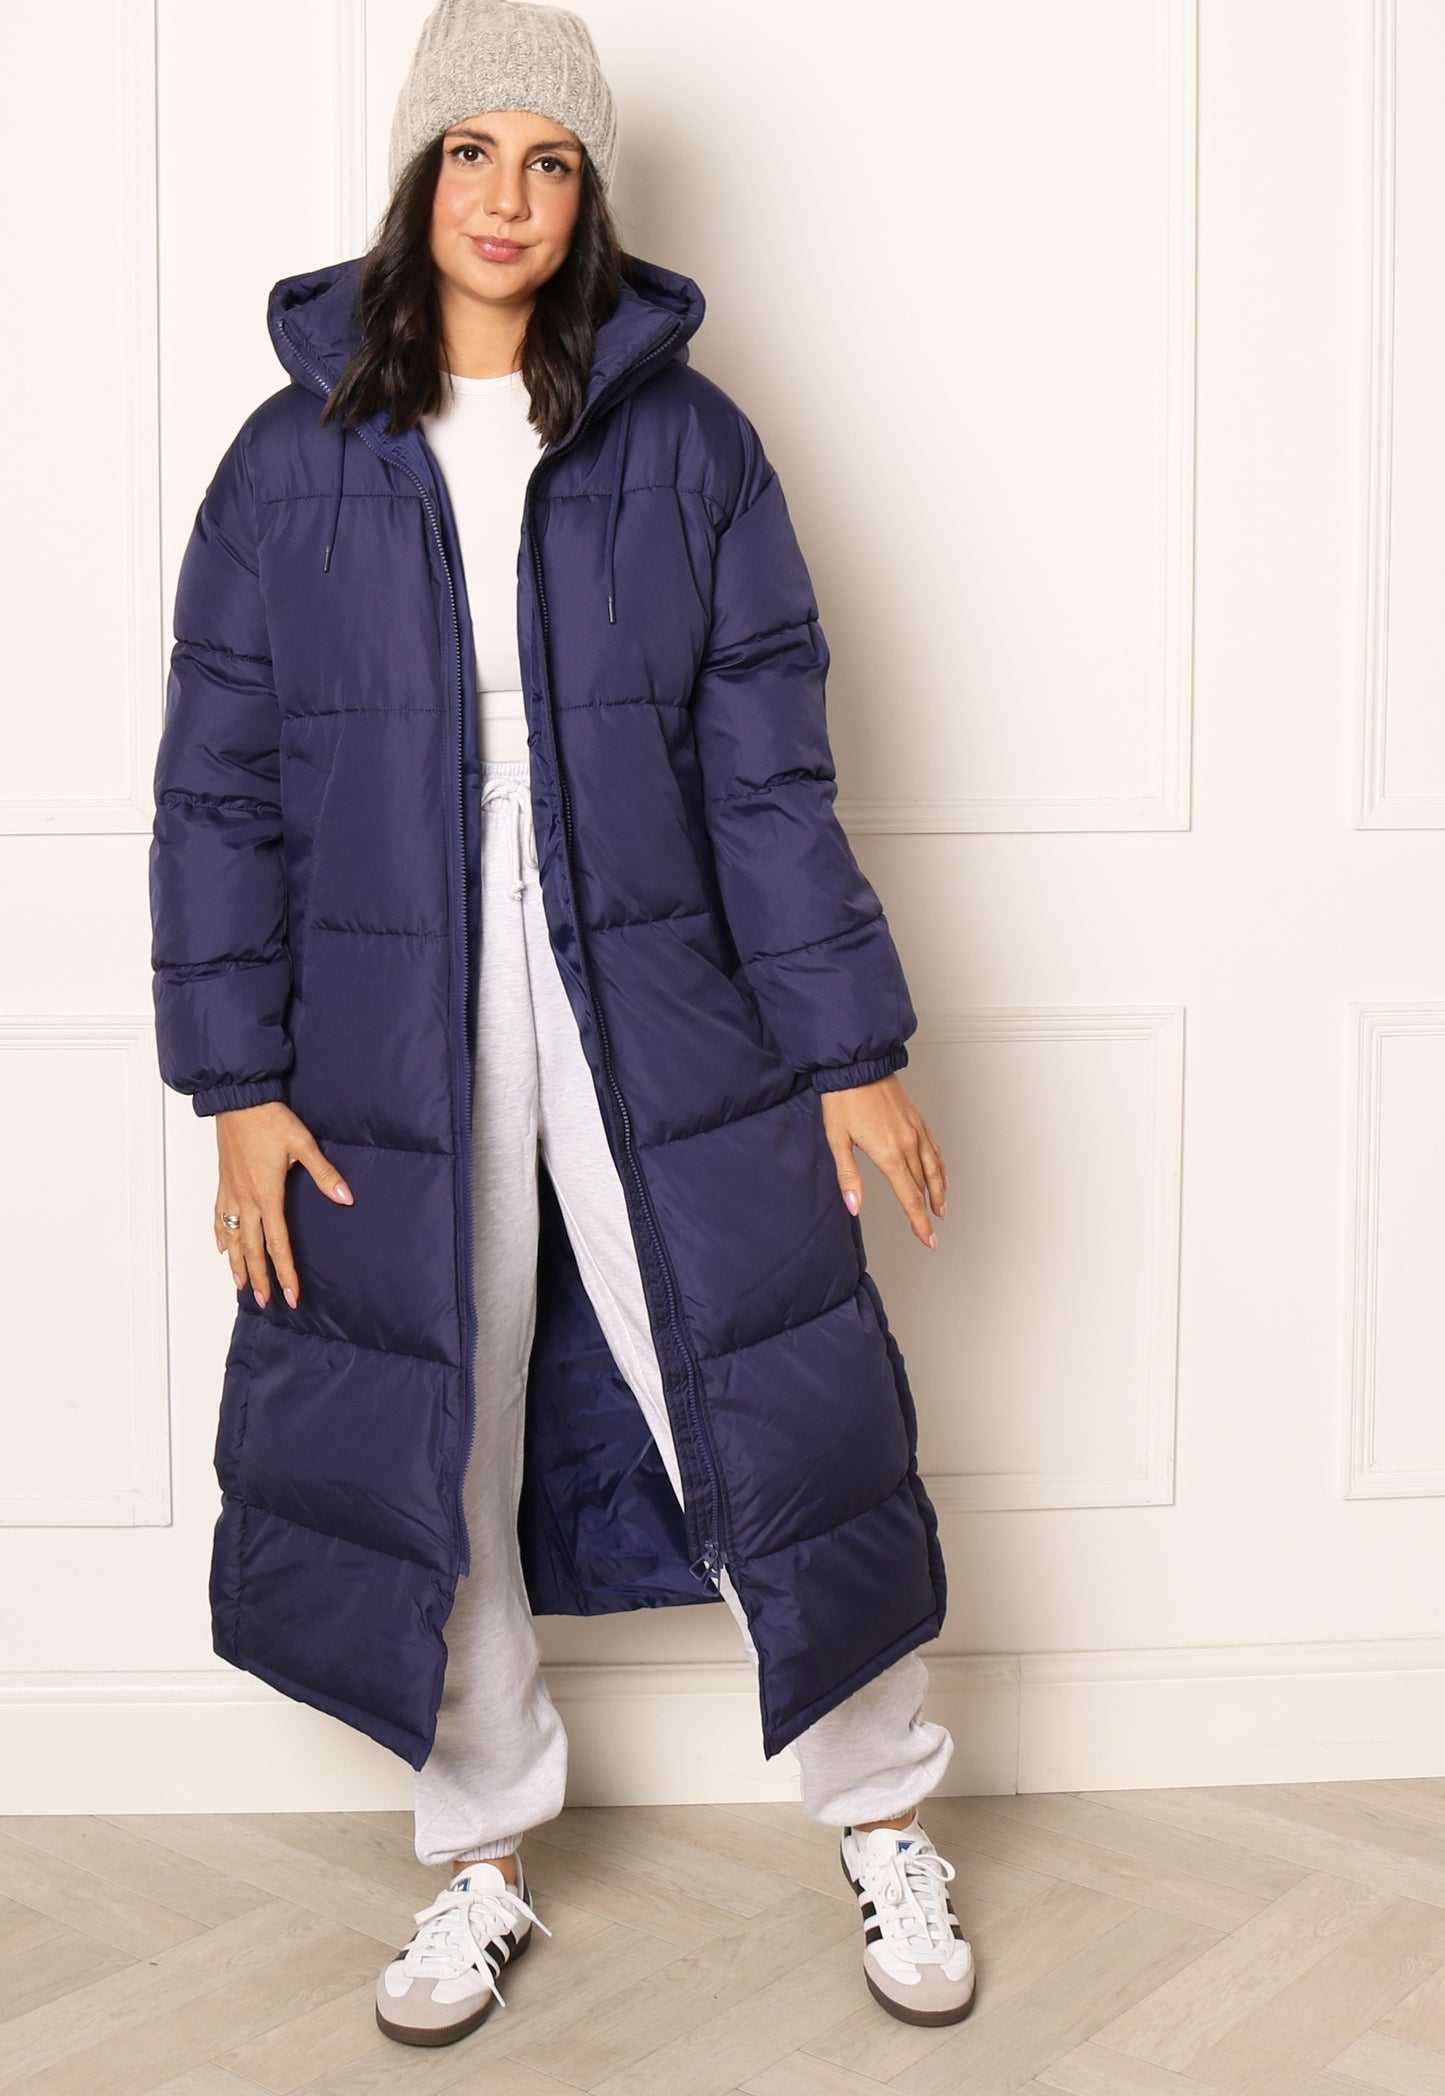 VERO MODA Klea Maxi Longline Puffer Coat with Hood in French Navy - One Nation Clothing